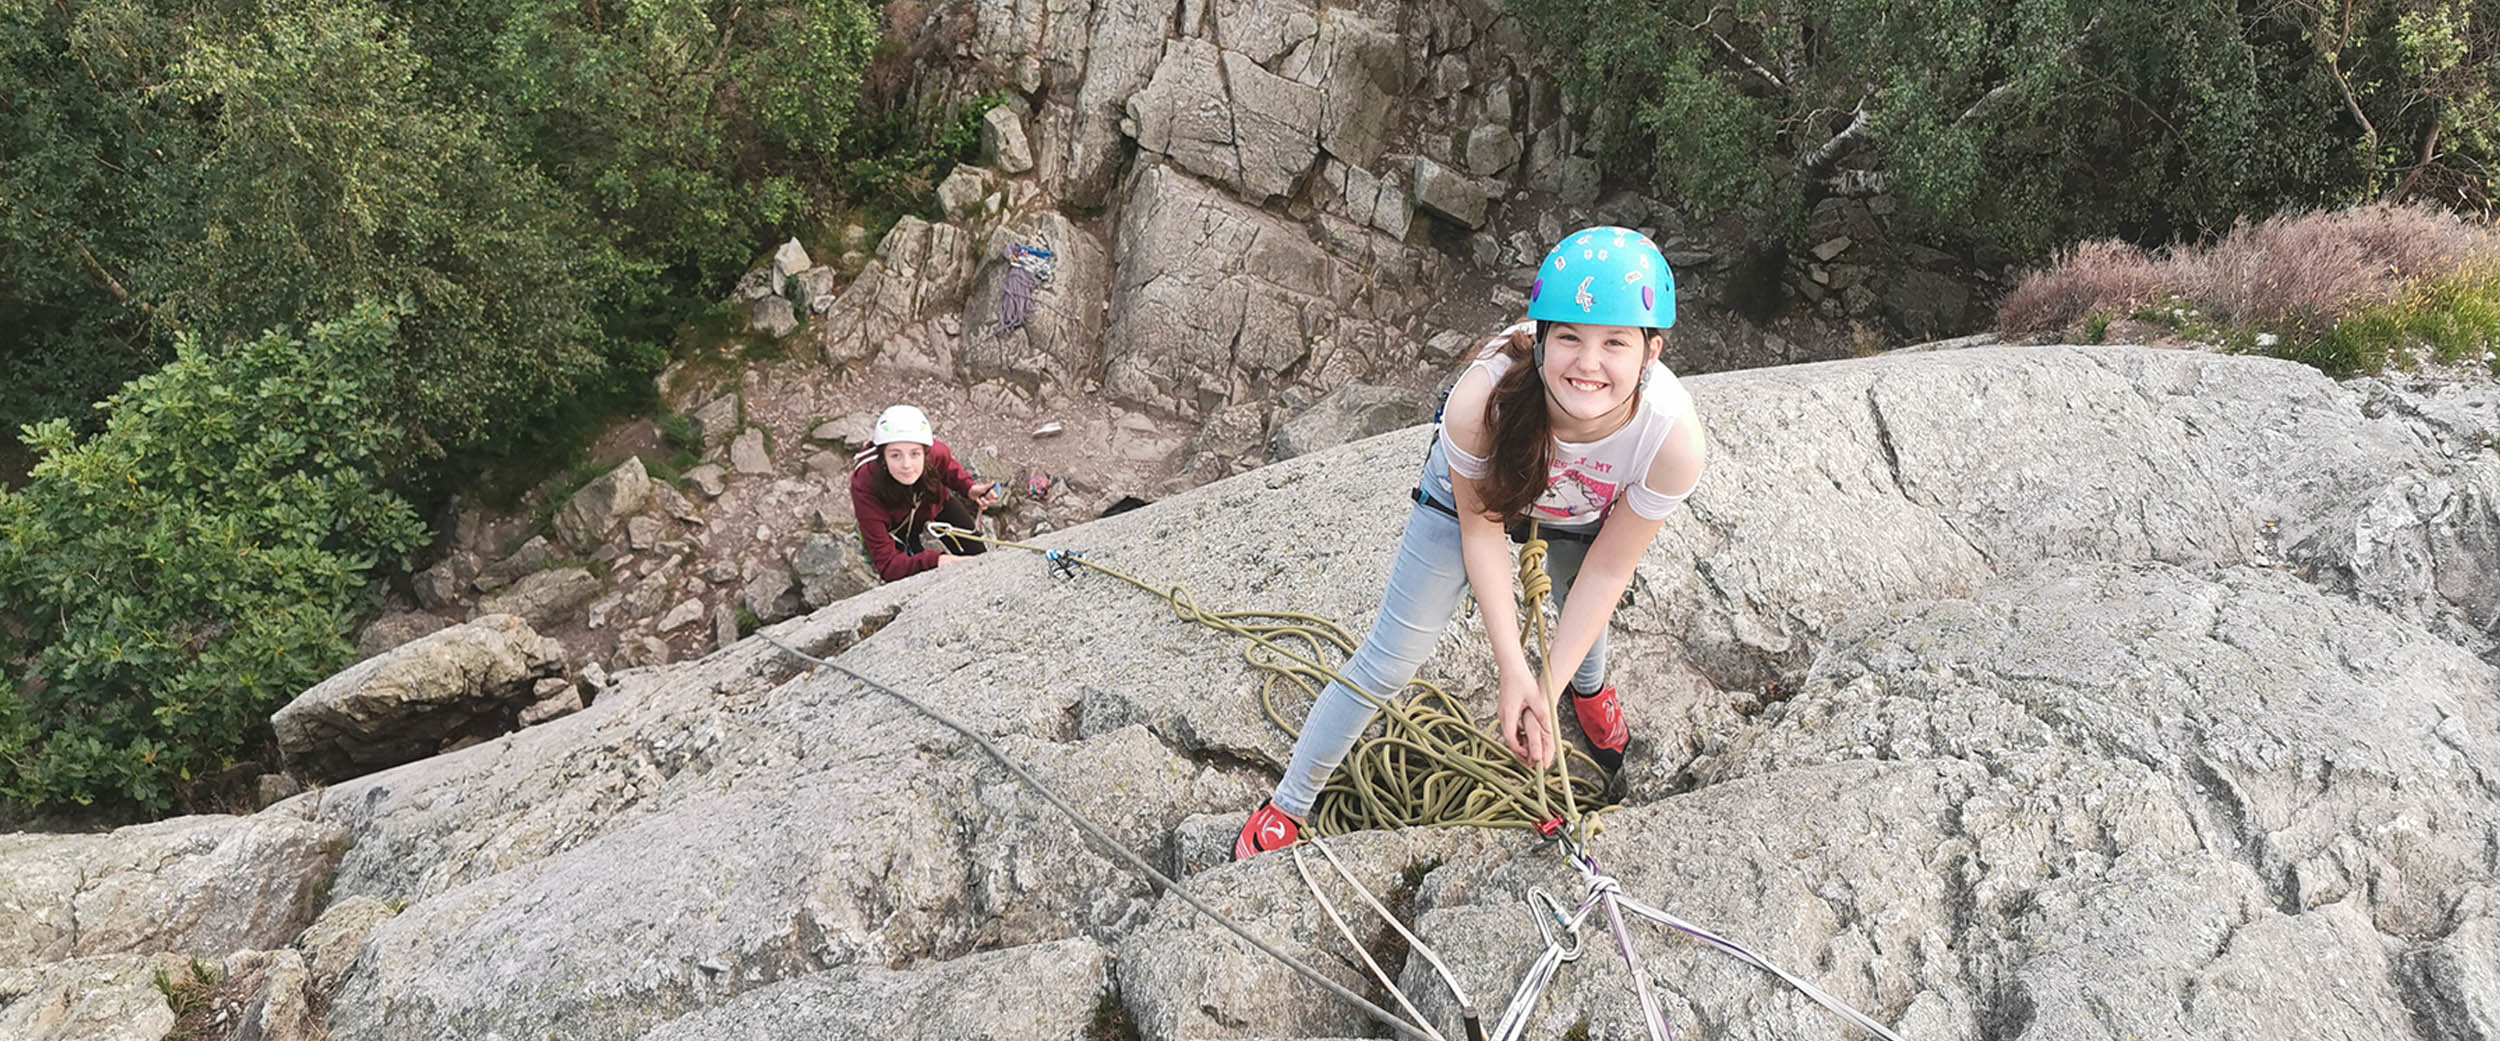 Two young girls climbing, one hasn't oticed a cross-loaded carabiner